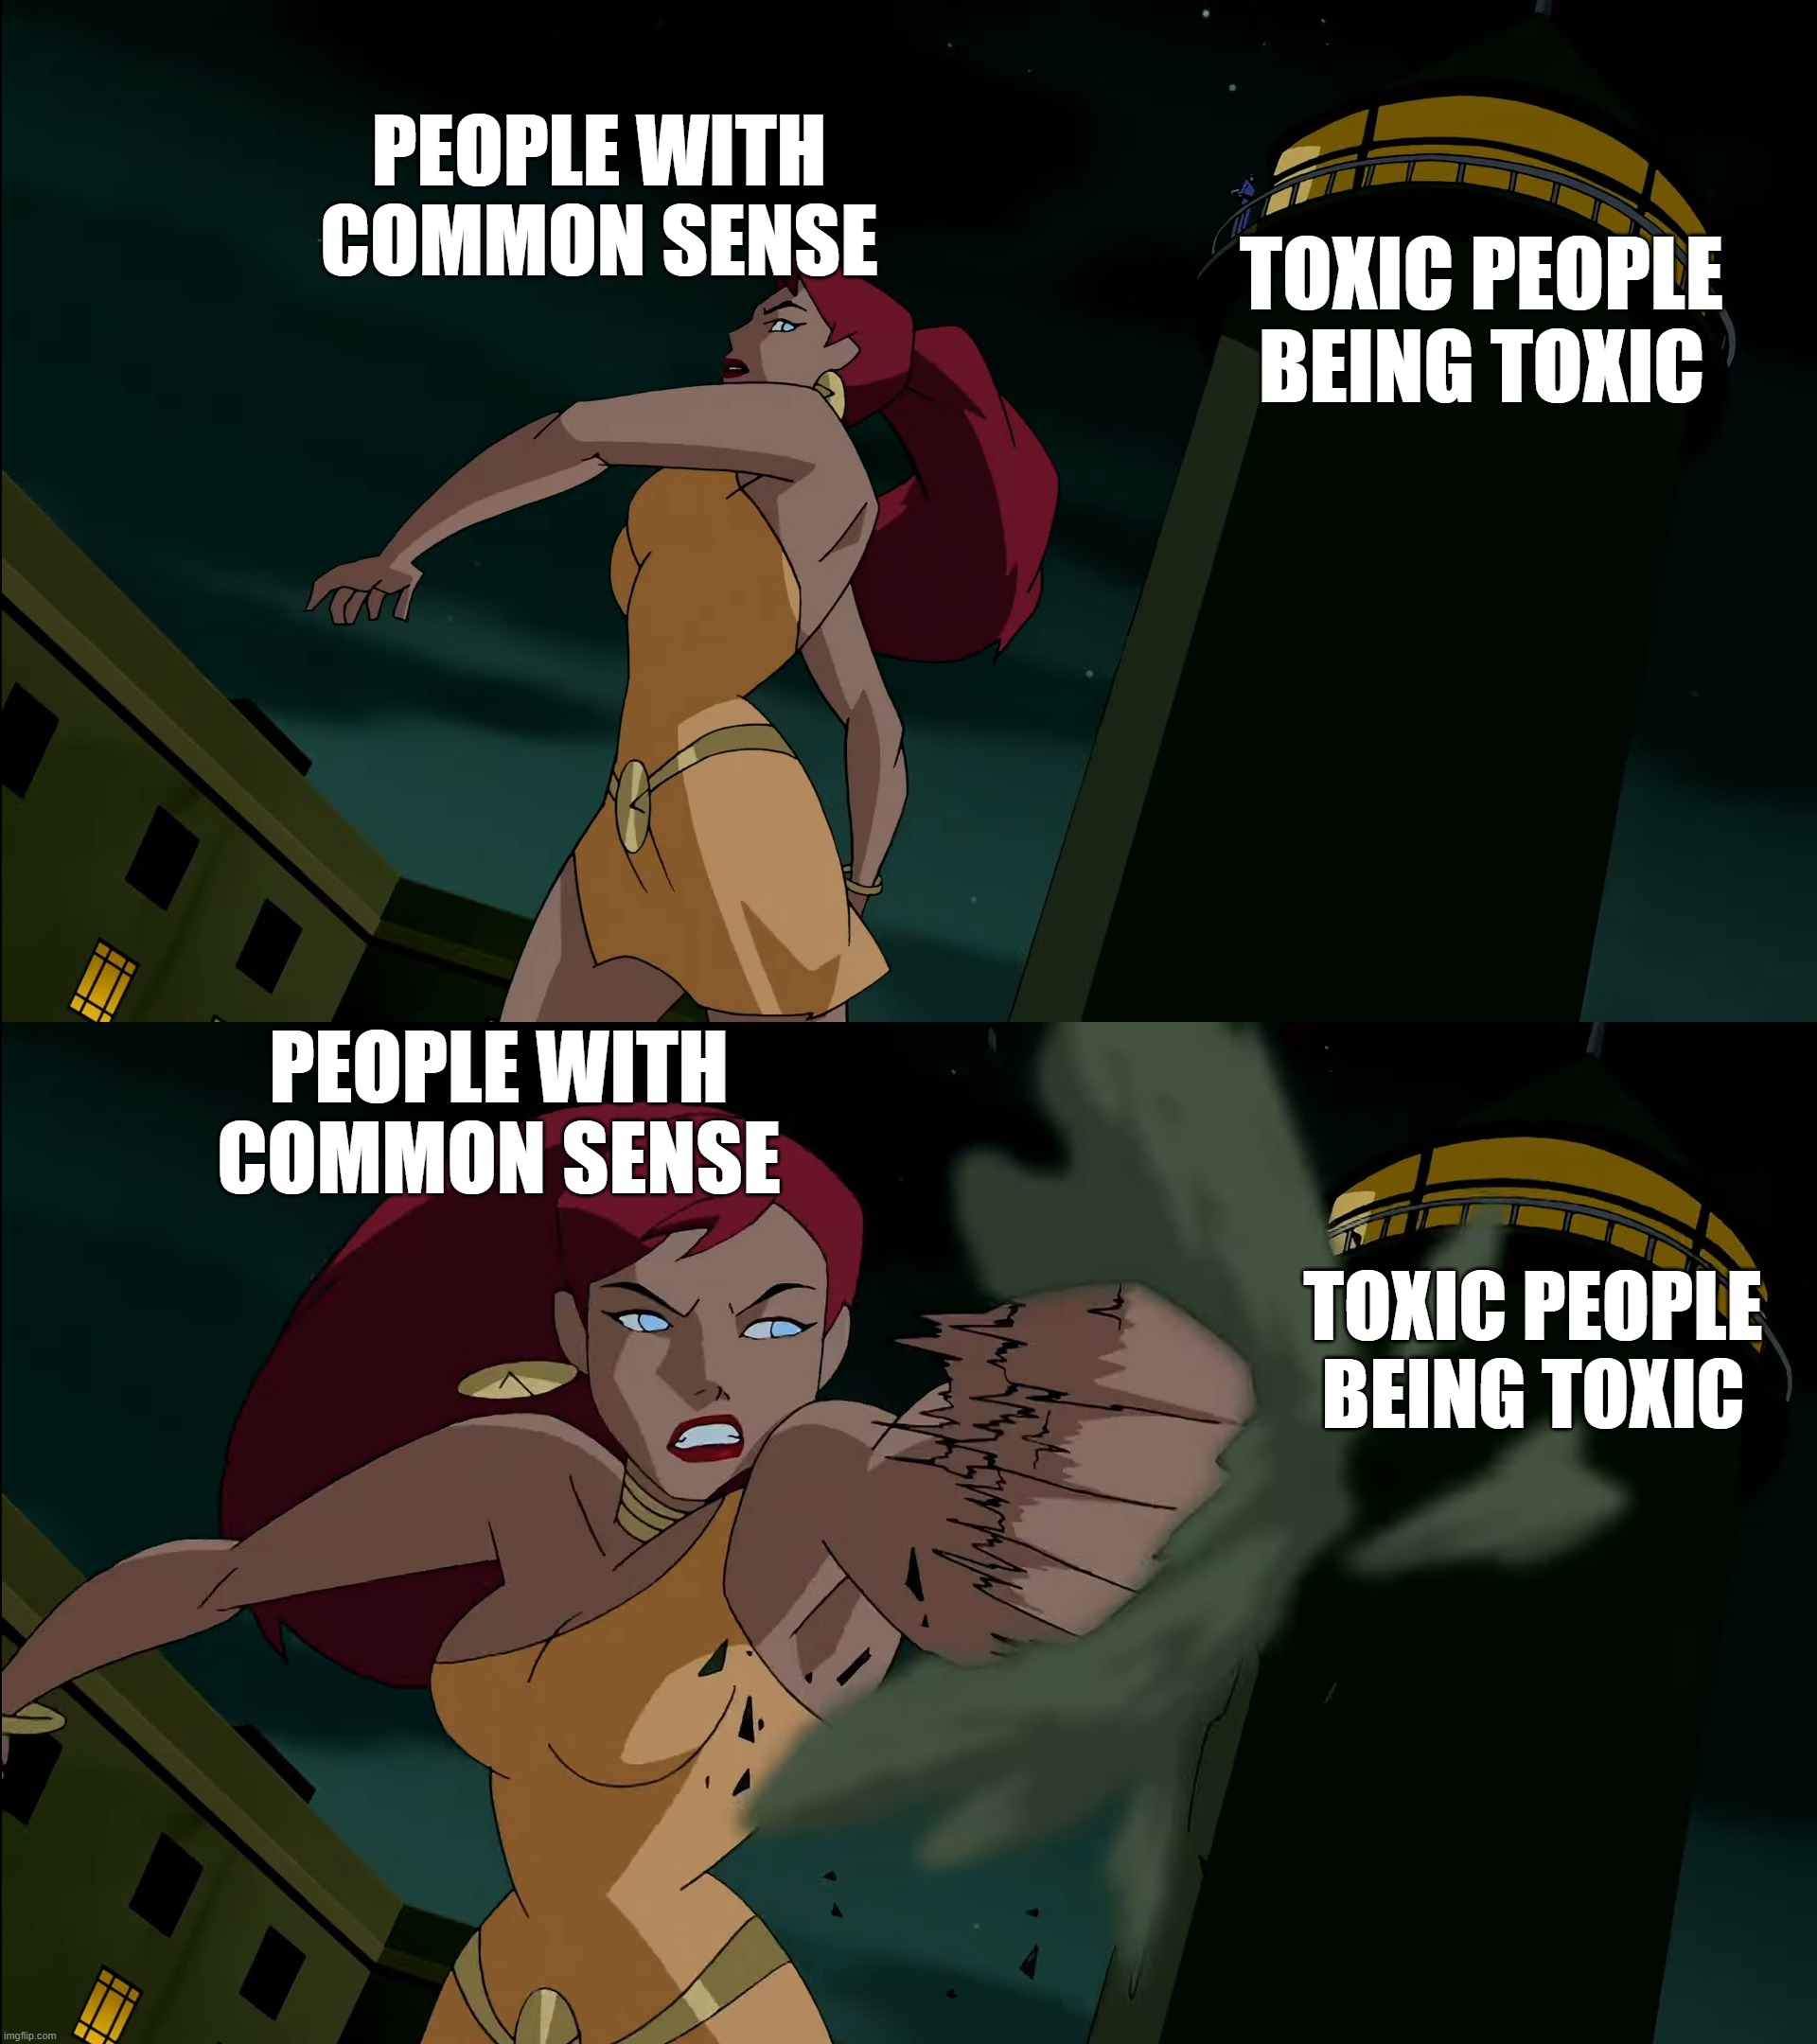 don't we all want to do that? | PEOPLE WITH COMMON SENSE; TOXIC PEOPLE BEING TOXIC; PEOPLE WITH COMMON SENSE; TOXIC PEOPLE BEING TOXIC | image tagged in giganta,toxic people,common sense | made w/ Imgflip meme maker